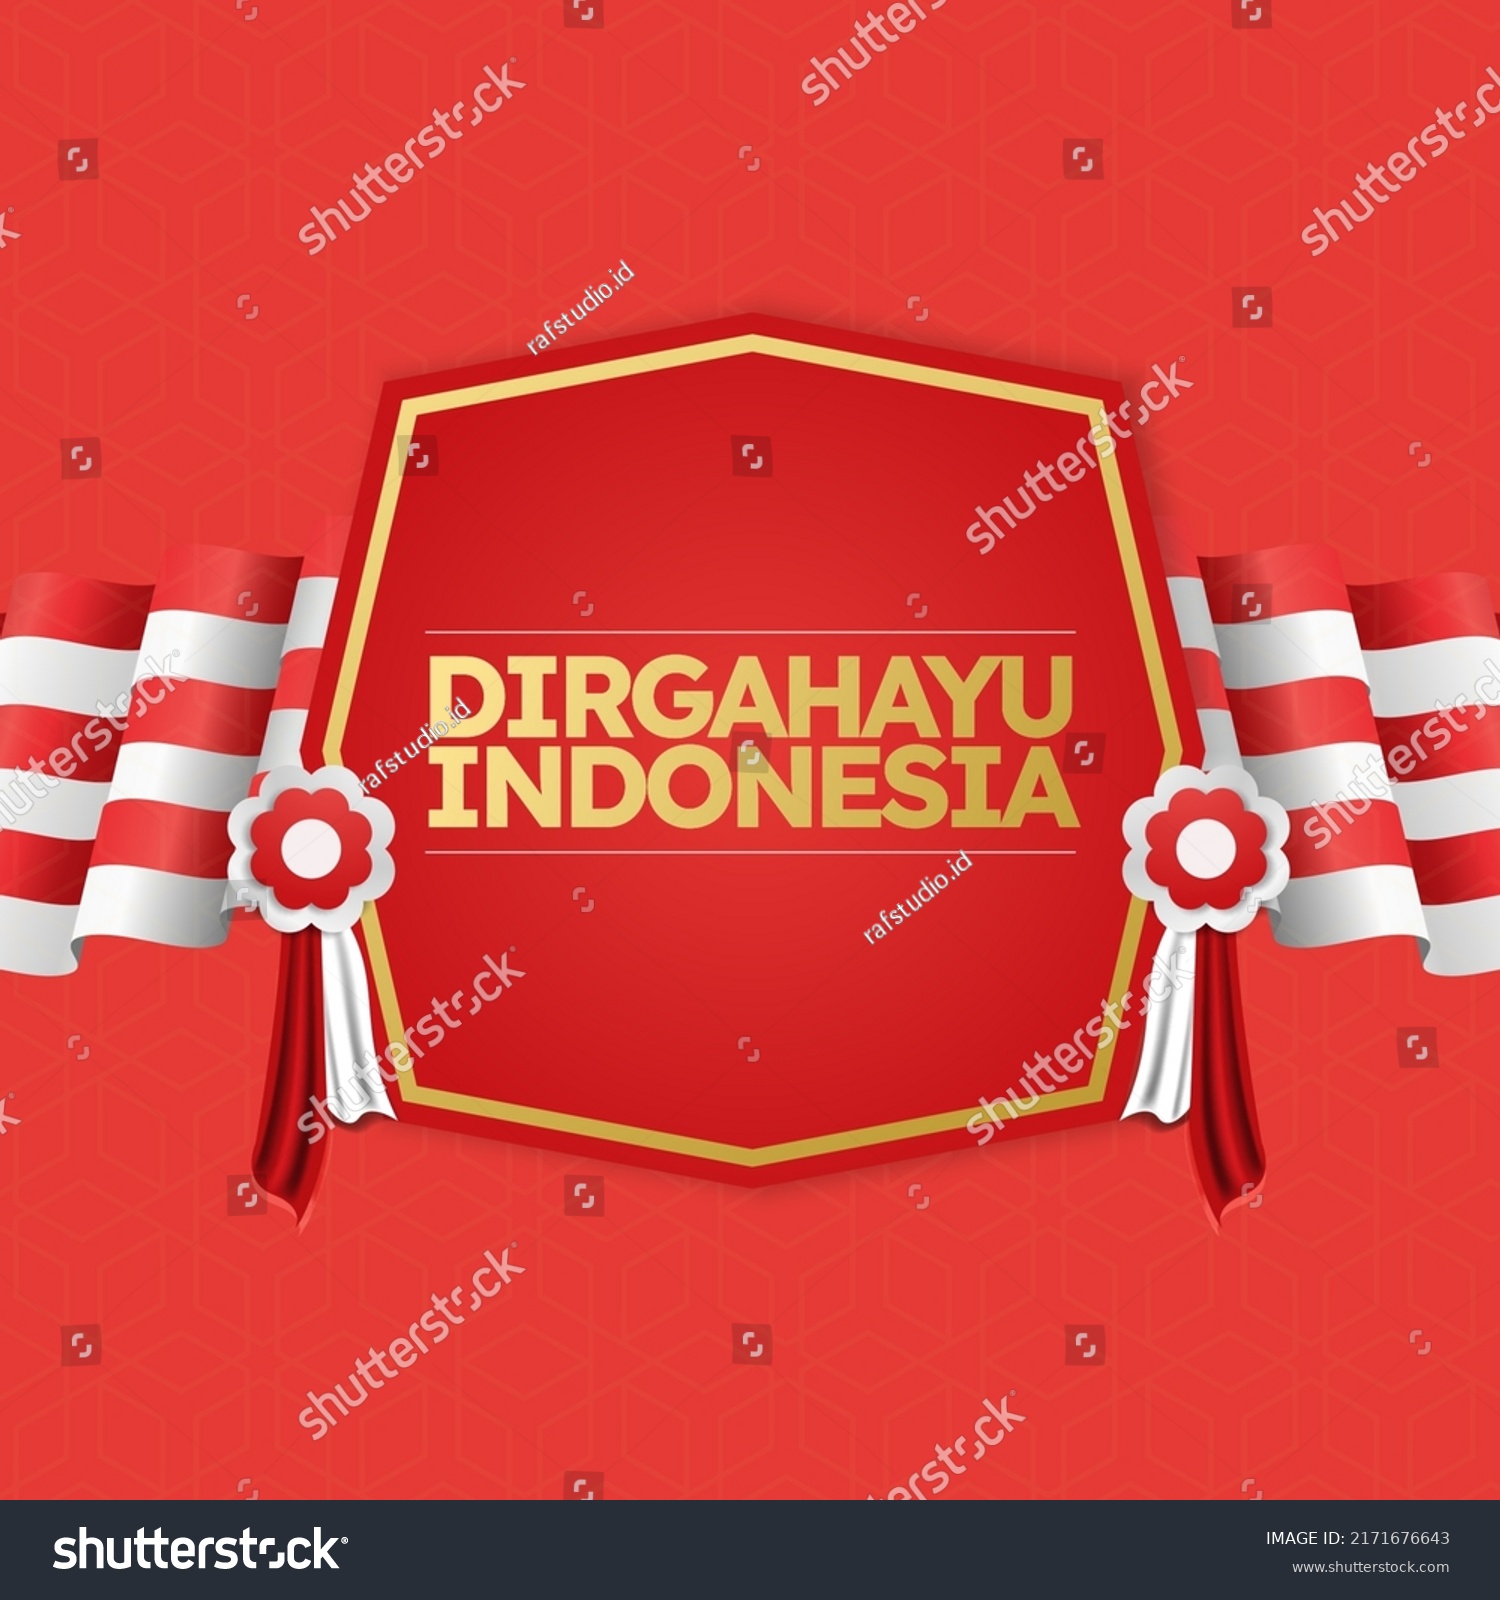 Hari Kemerdekaan Indonesia Means Indonesian Independence Stock Vector Royalty Free 2171676643 6431